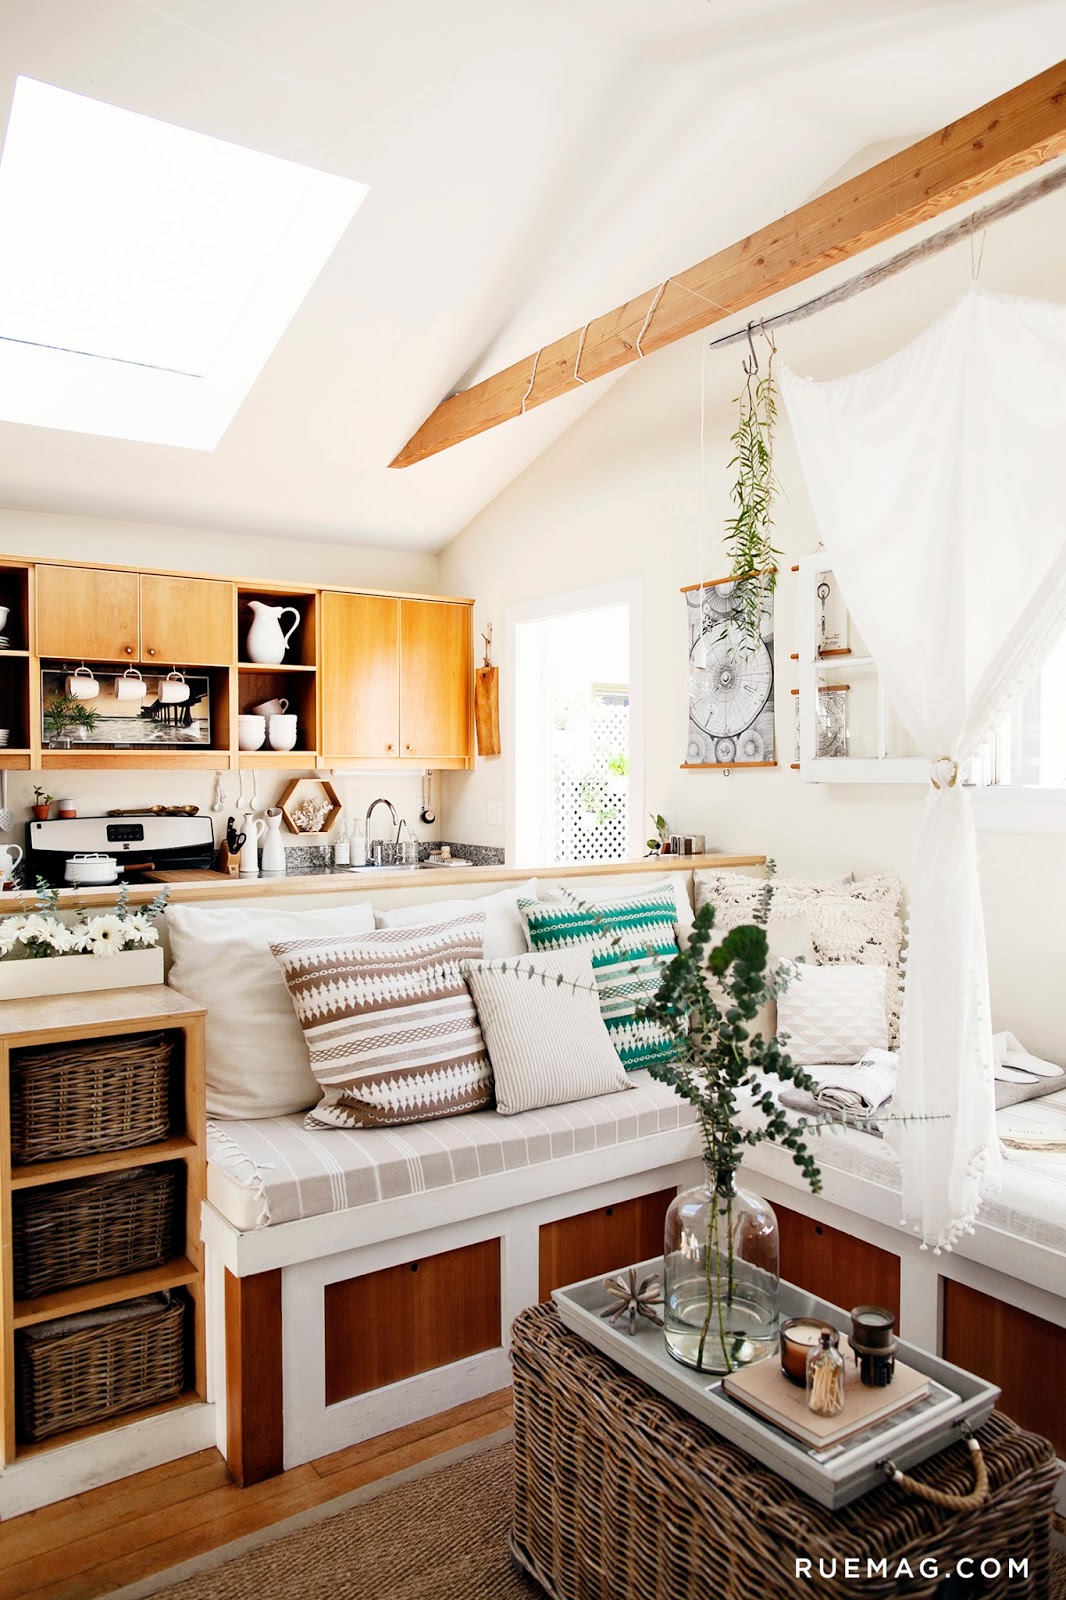 The California Home of Whitney Leigh Morris - B NOTES OF INSPIRATION